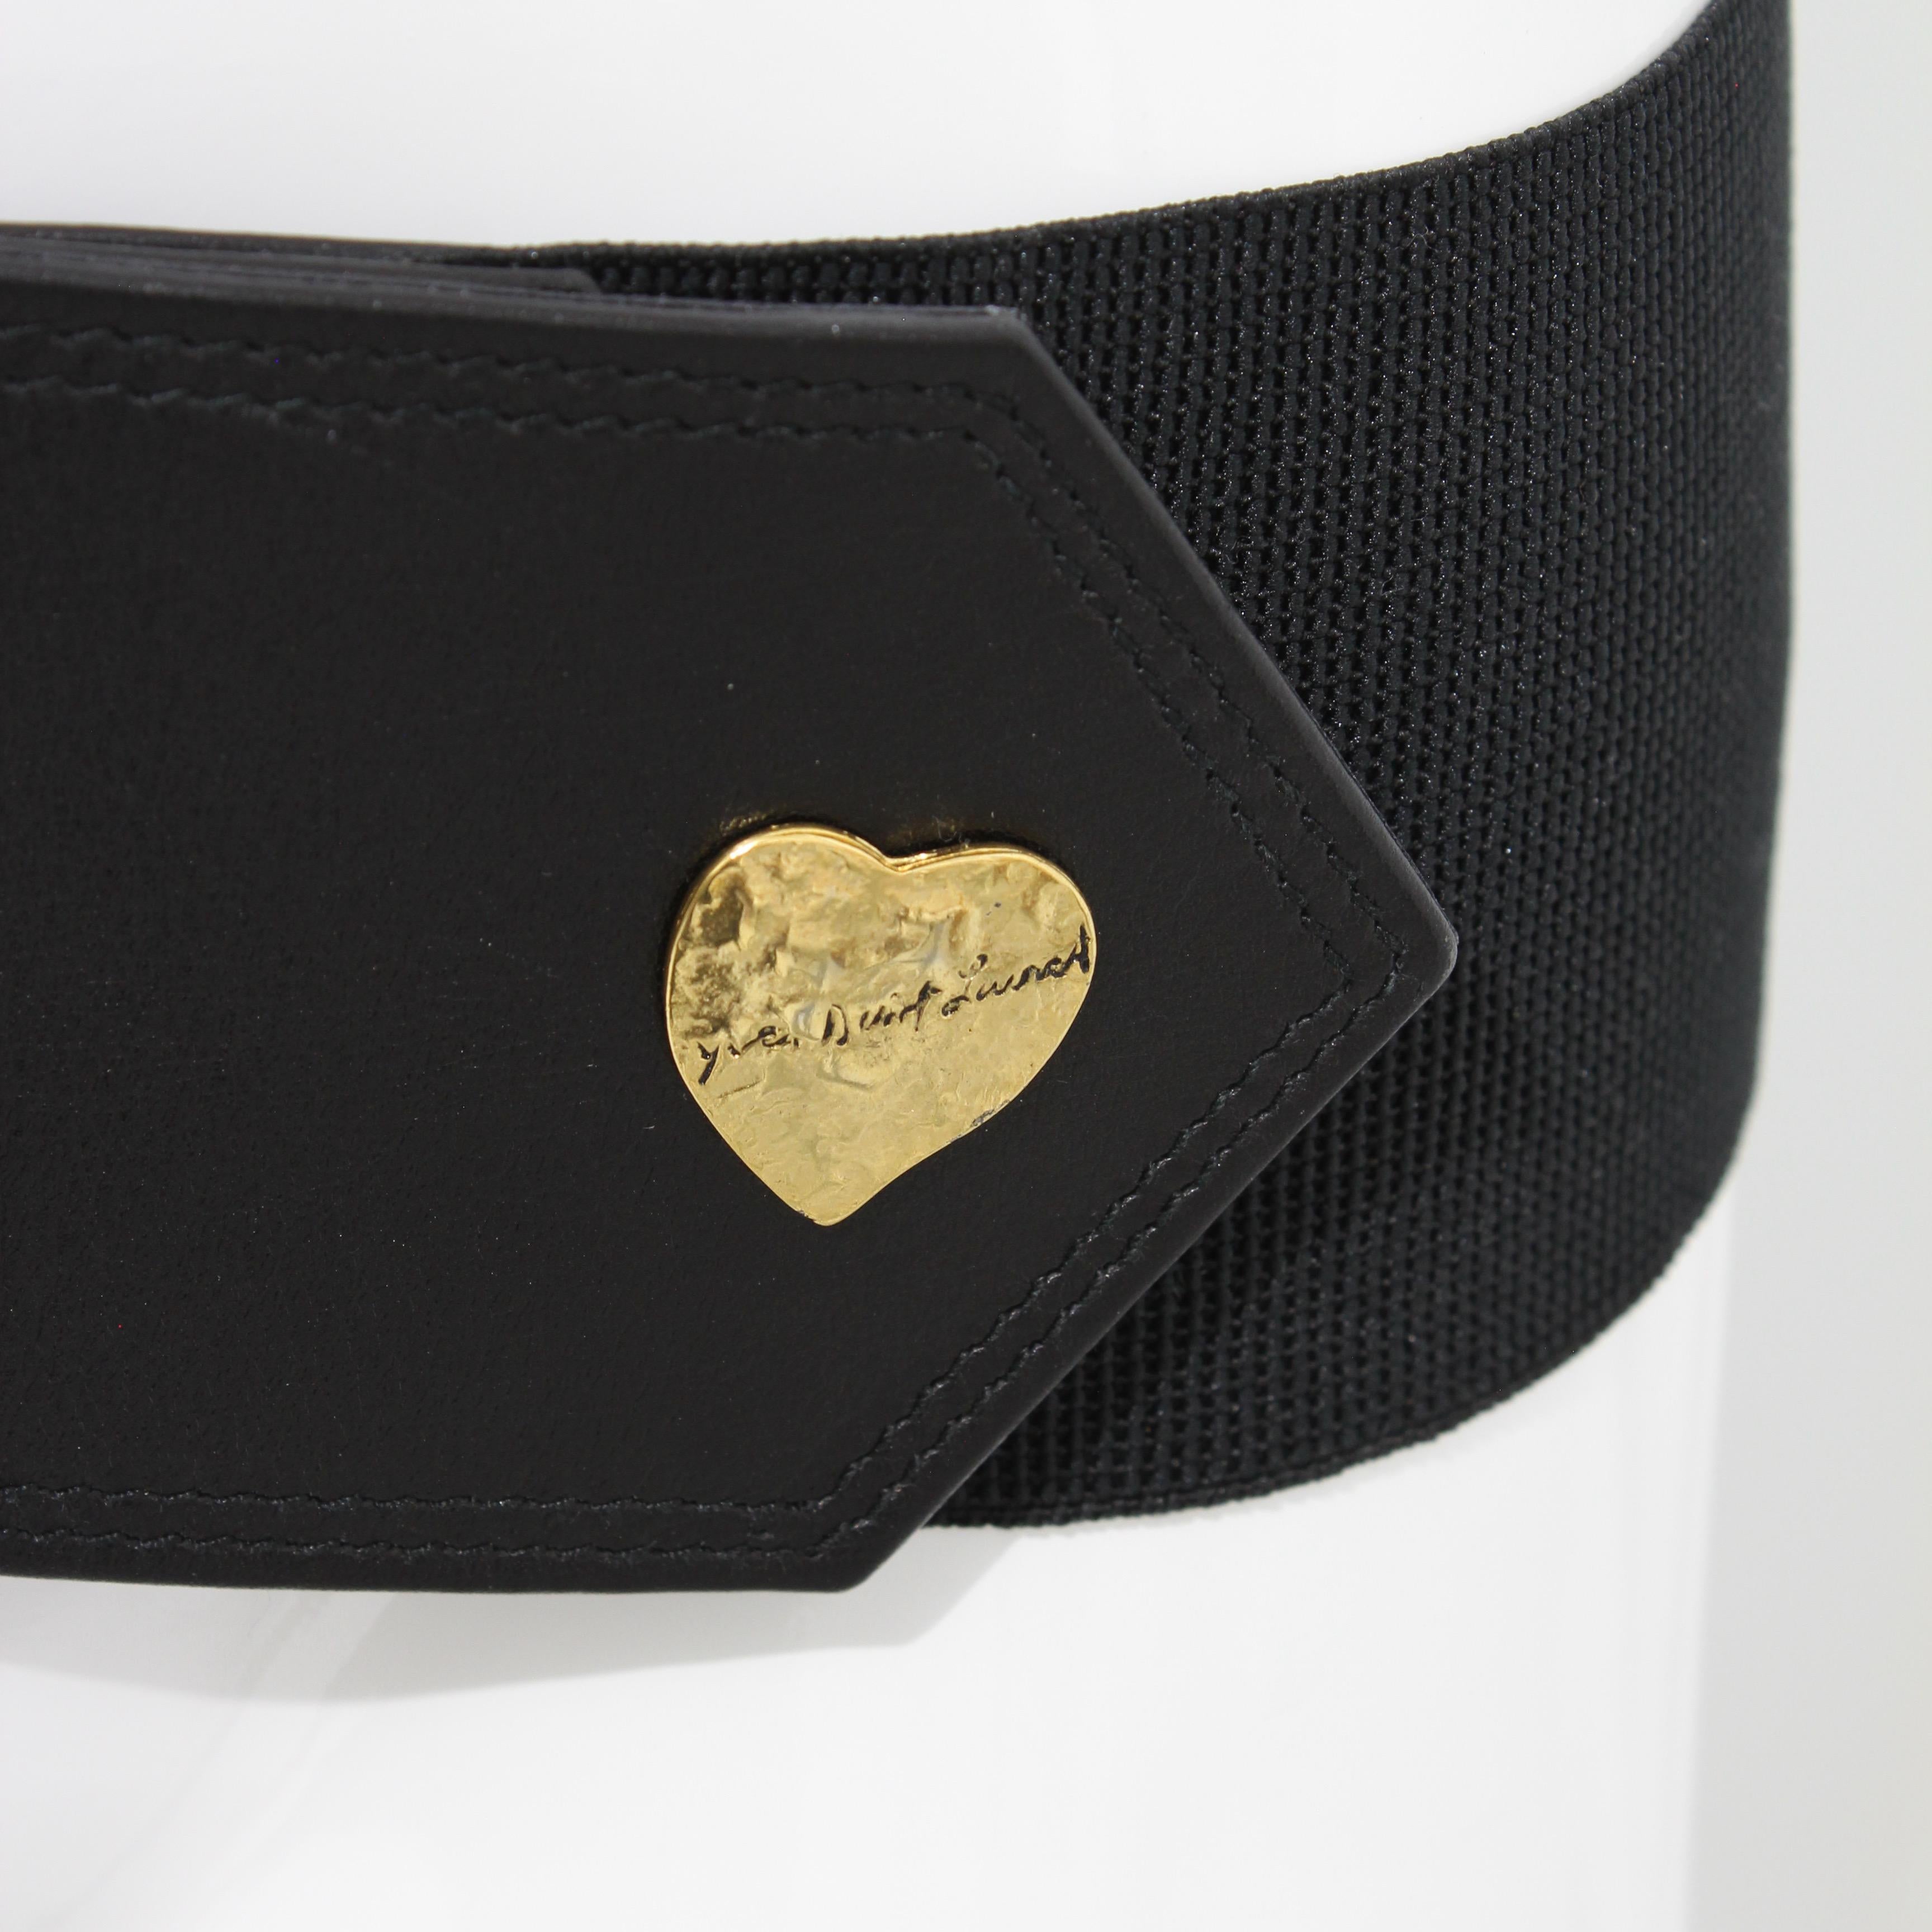 Yves Saint Laurent Wide Belt with Hearts Gold Metal YSL Leather Stretch Size M  5